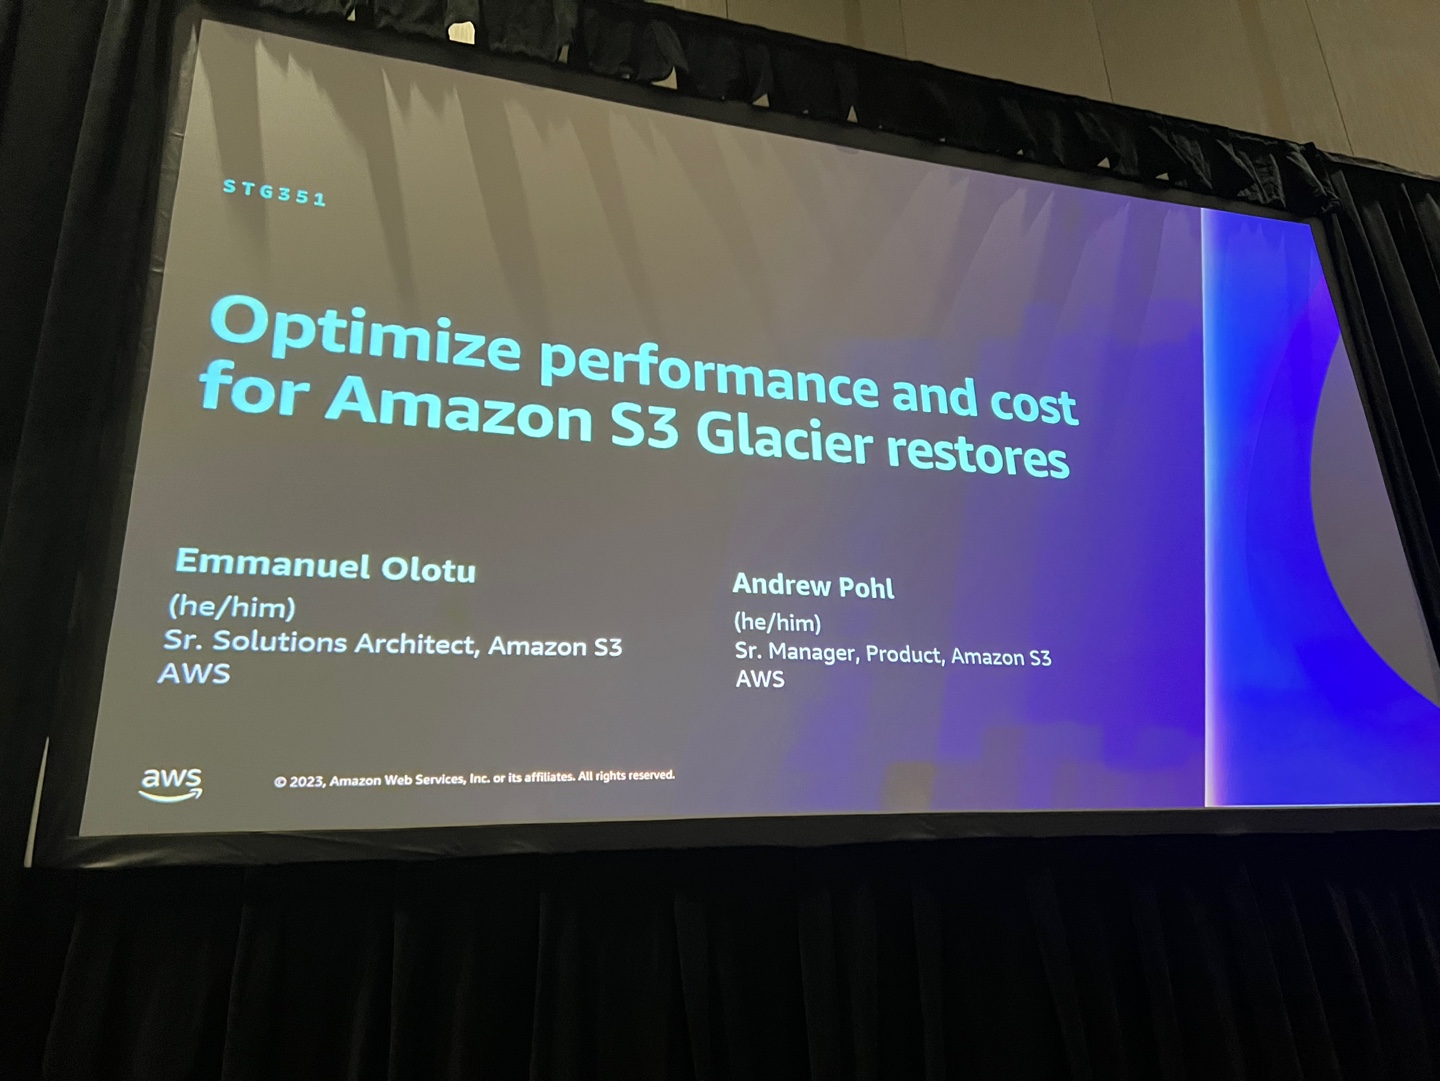 Optimize performance and cost for Amazon S3 Glacier restores